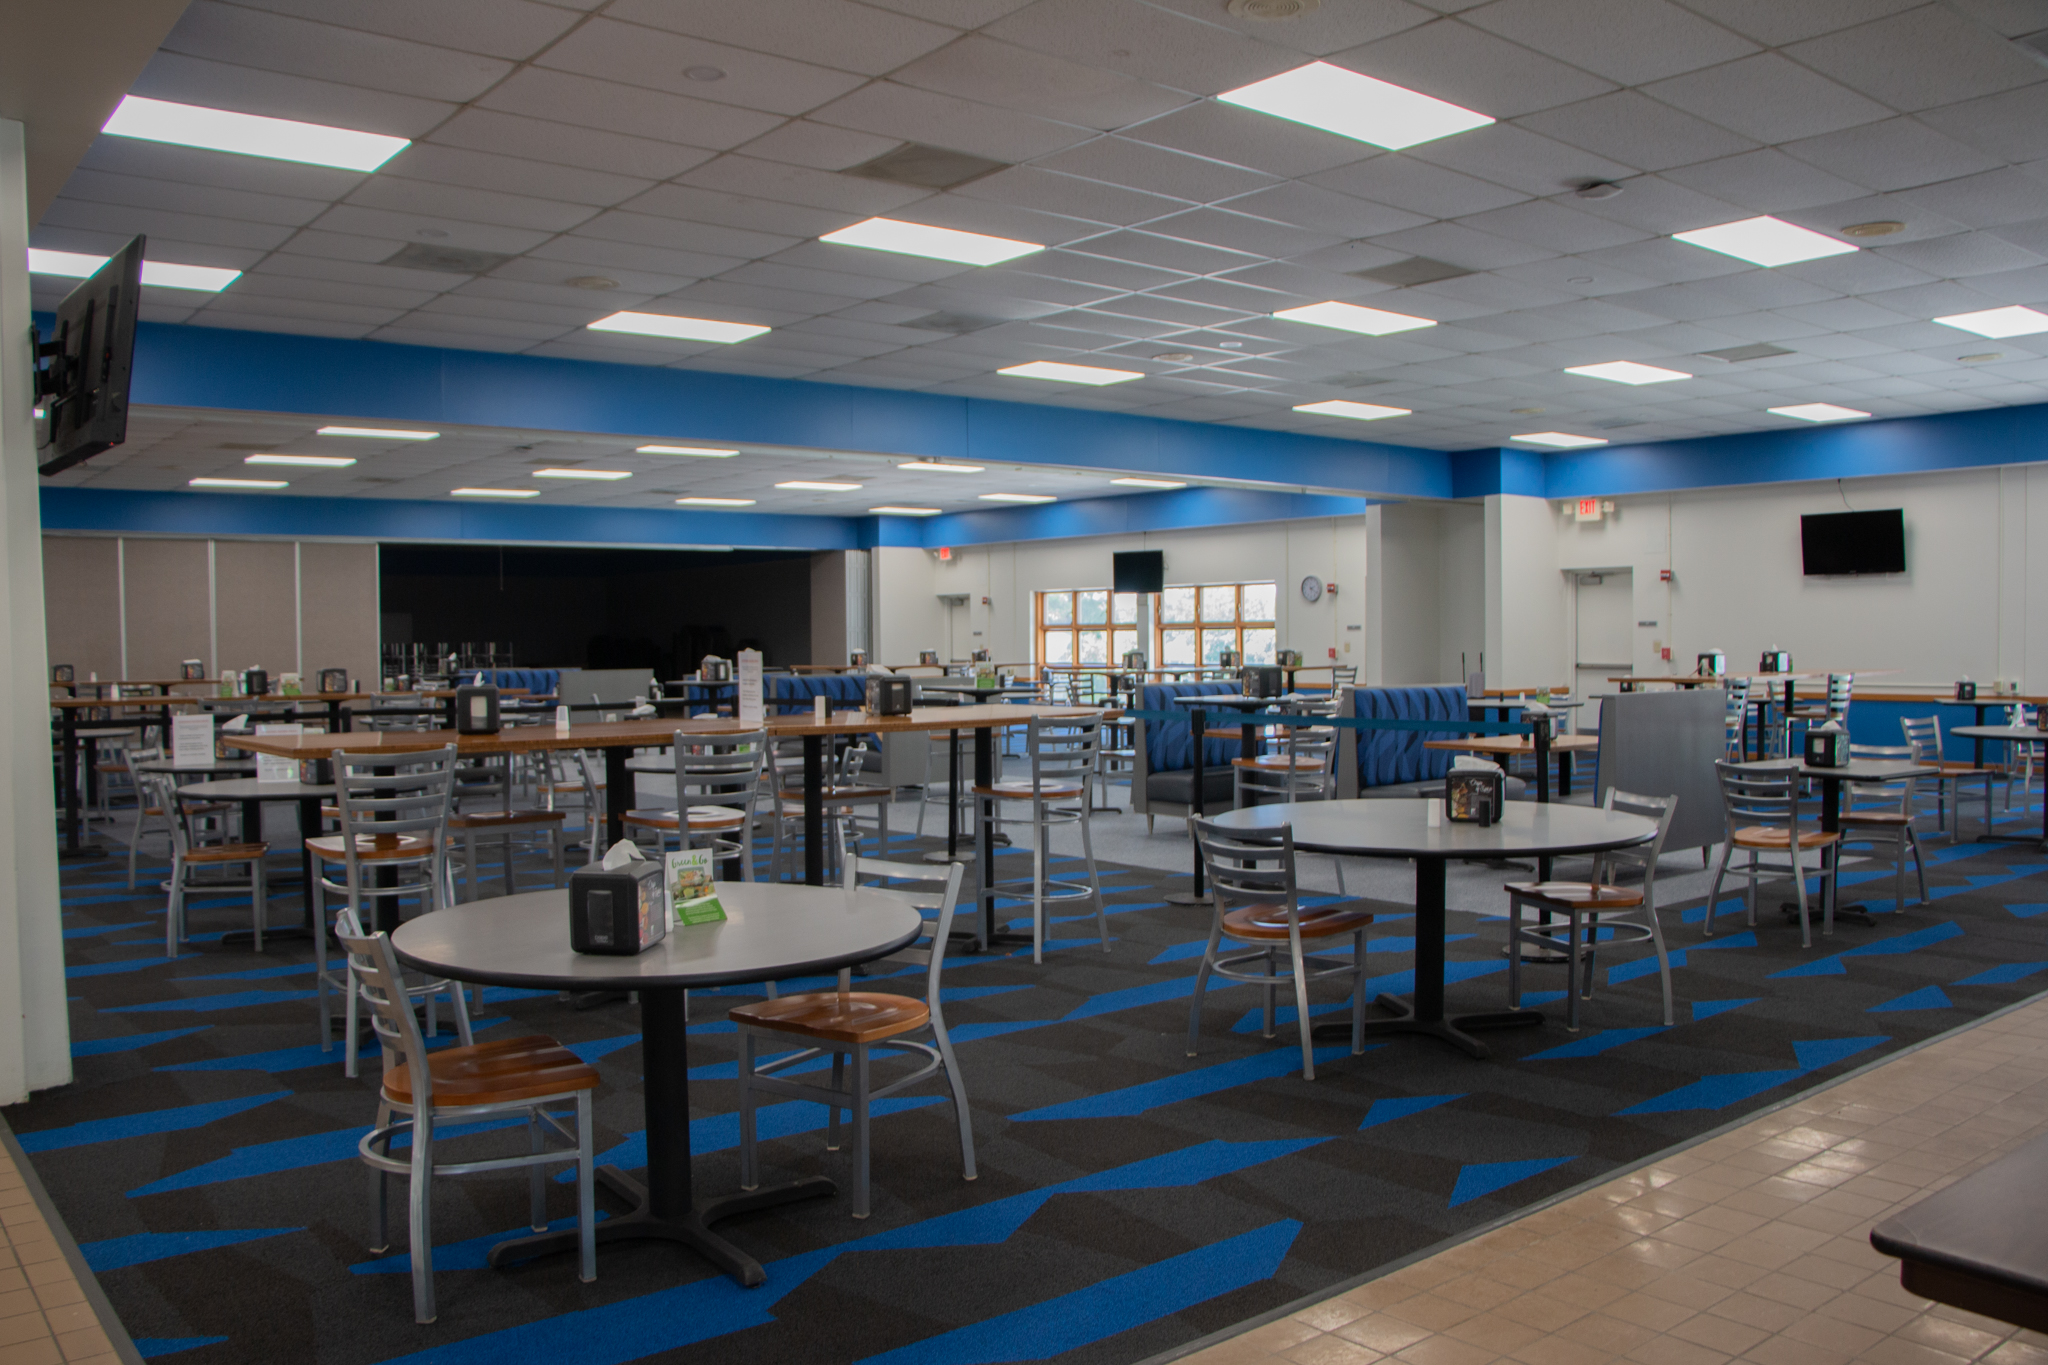 Another view of Blue Oak Room seating areas.